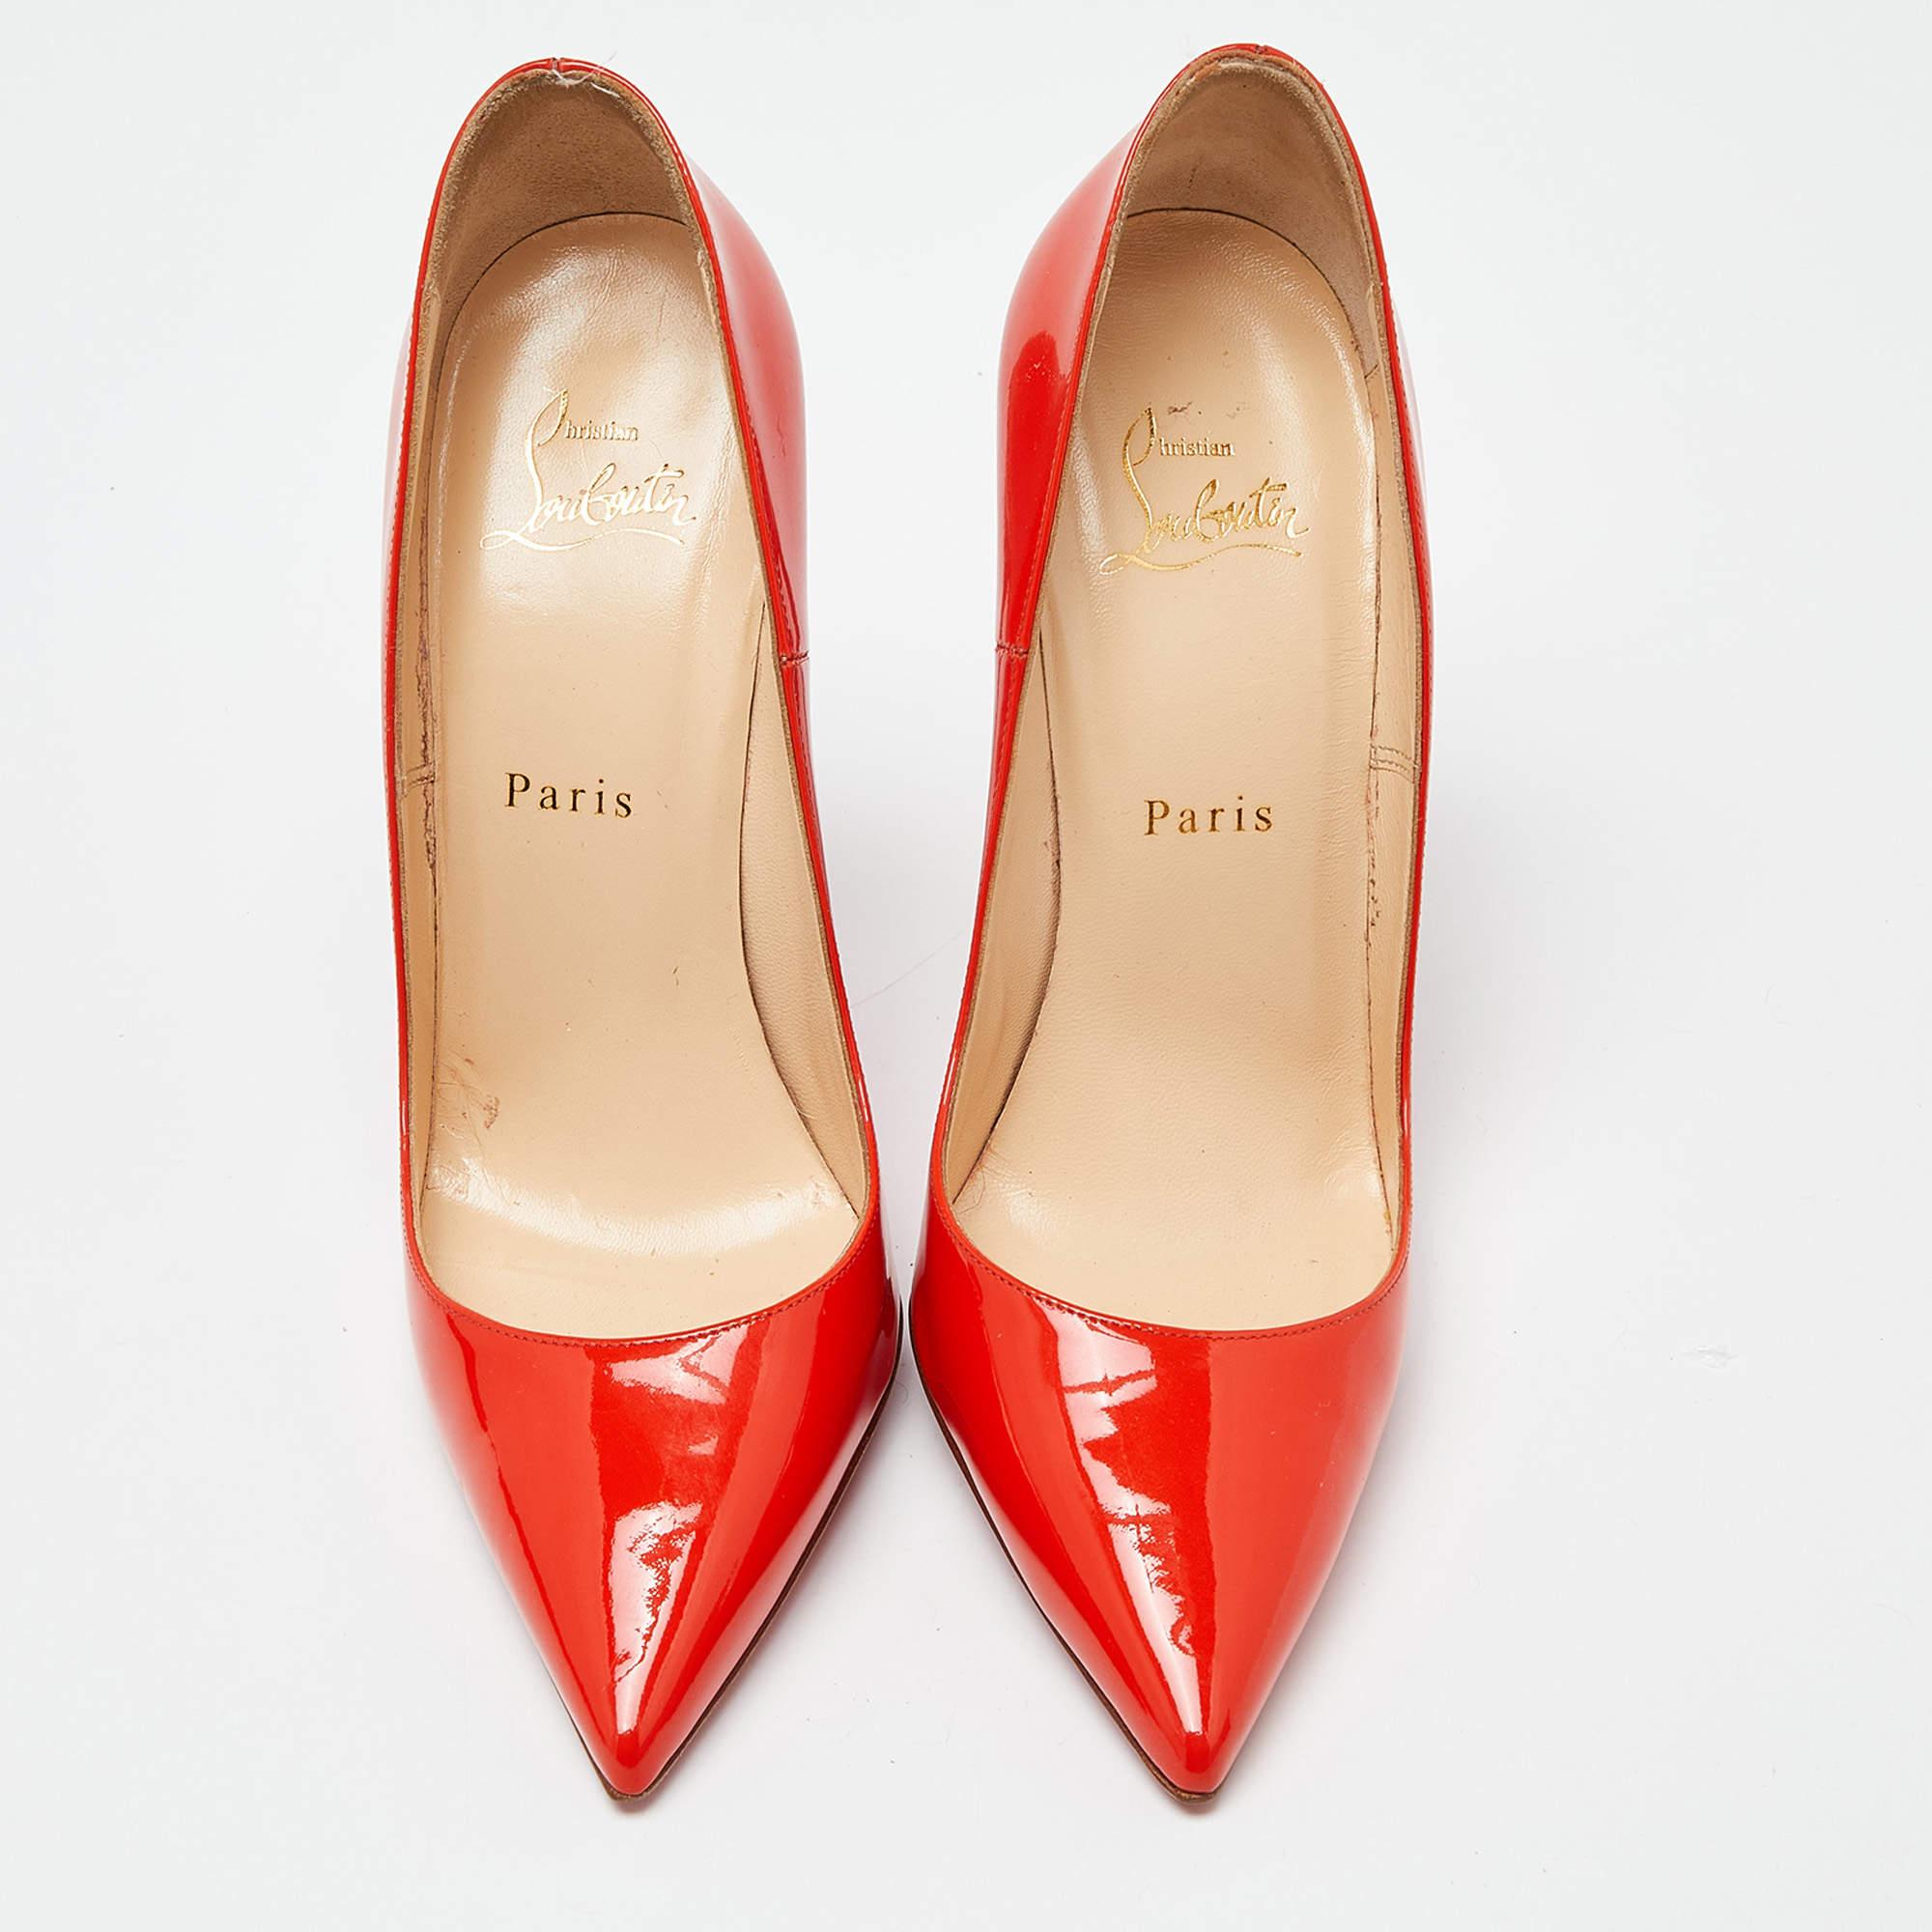 The classic pointed toes and signature red-lacquered sole characterize this pair of Christian Louboutin pumps. Crafted from patent leather, it has been styled with a red shade. The sleek heels and durable construction signify the brand's expertise